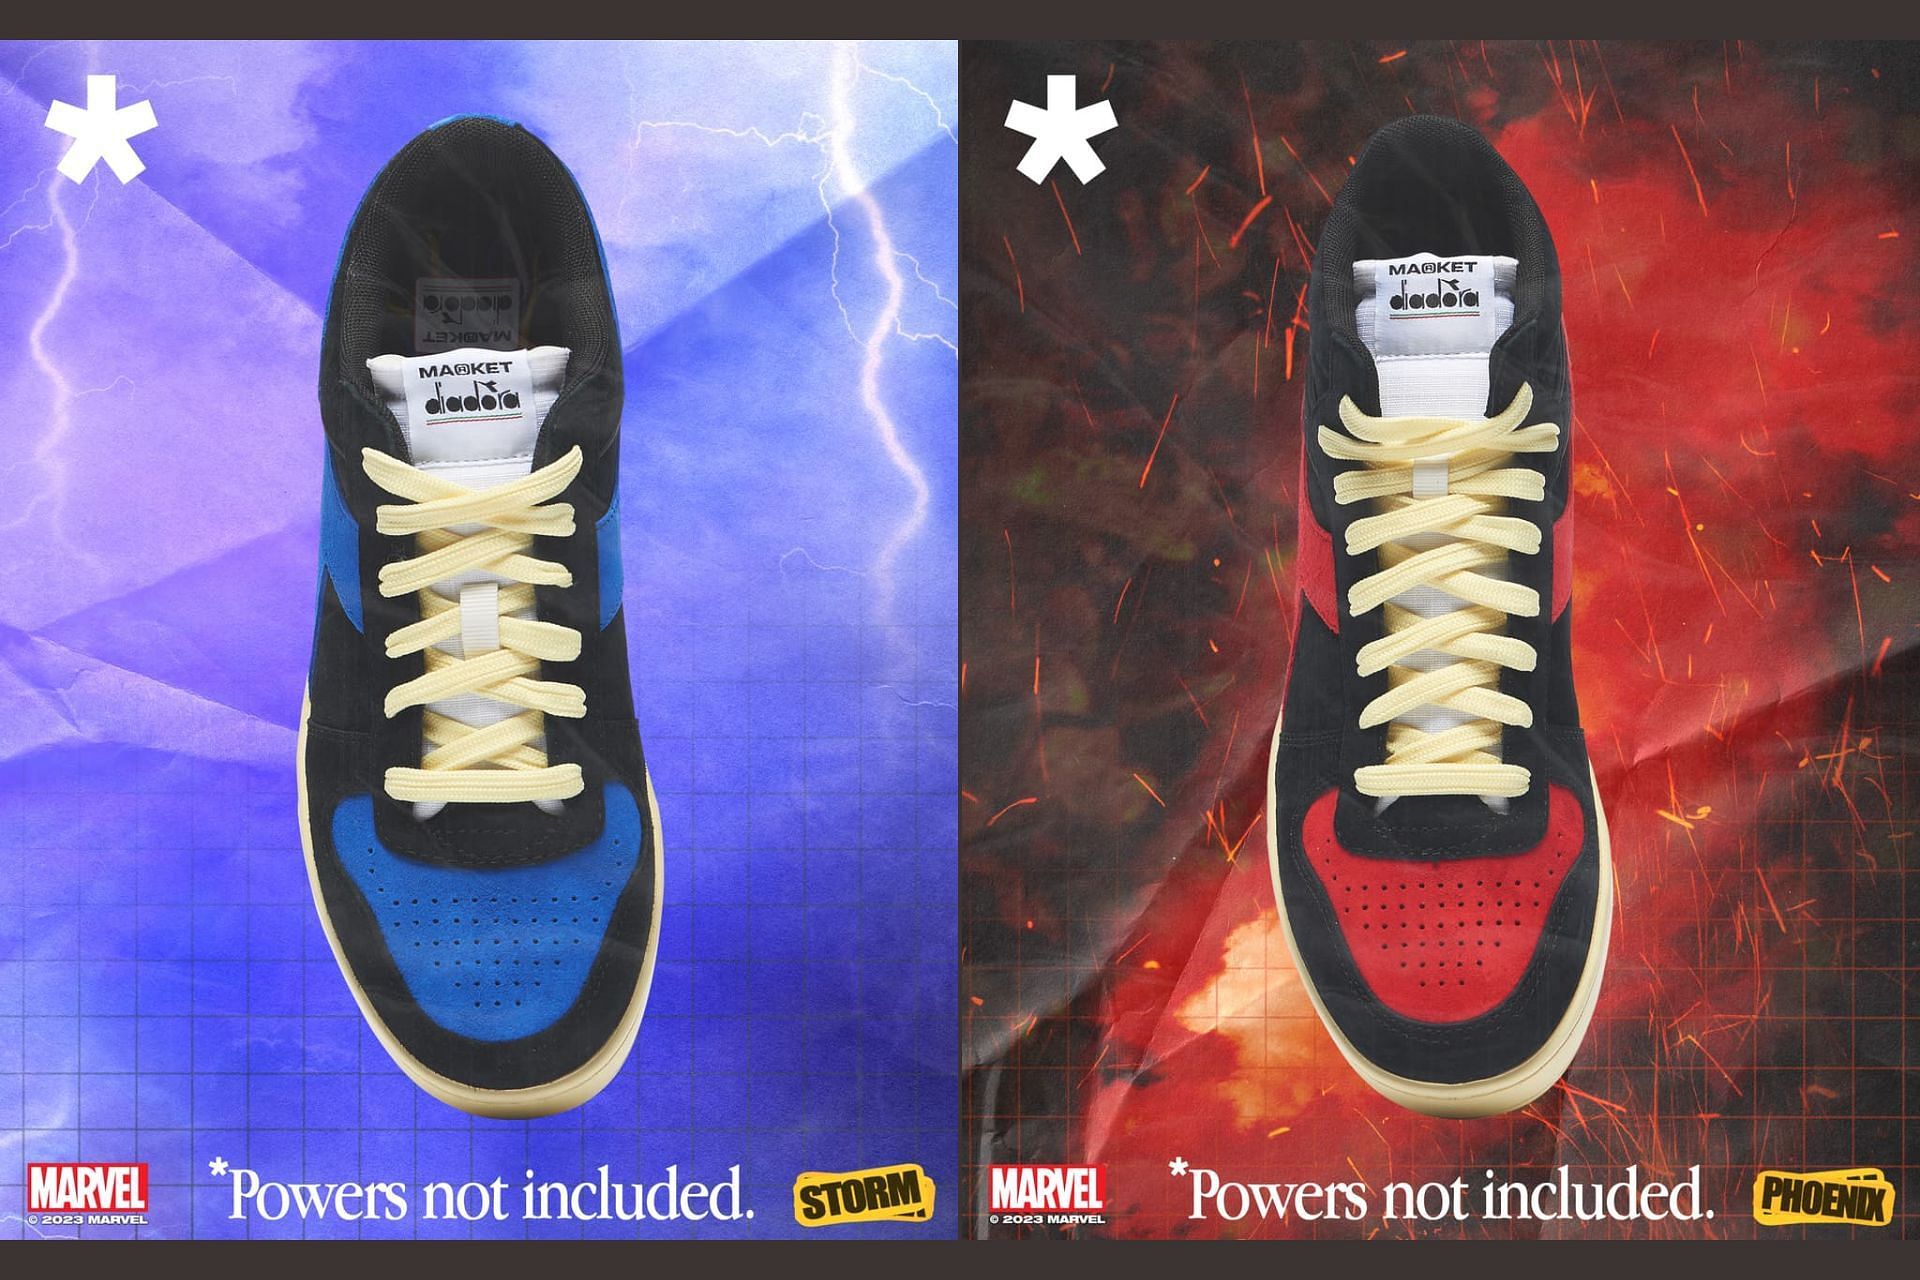 The upcoming X-Men x Foot Locker x Diadora 3-piece footwear collection honors Phoenix, Storm, and Wolverine (Image via Marvel)